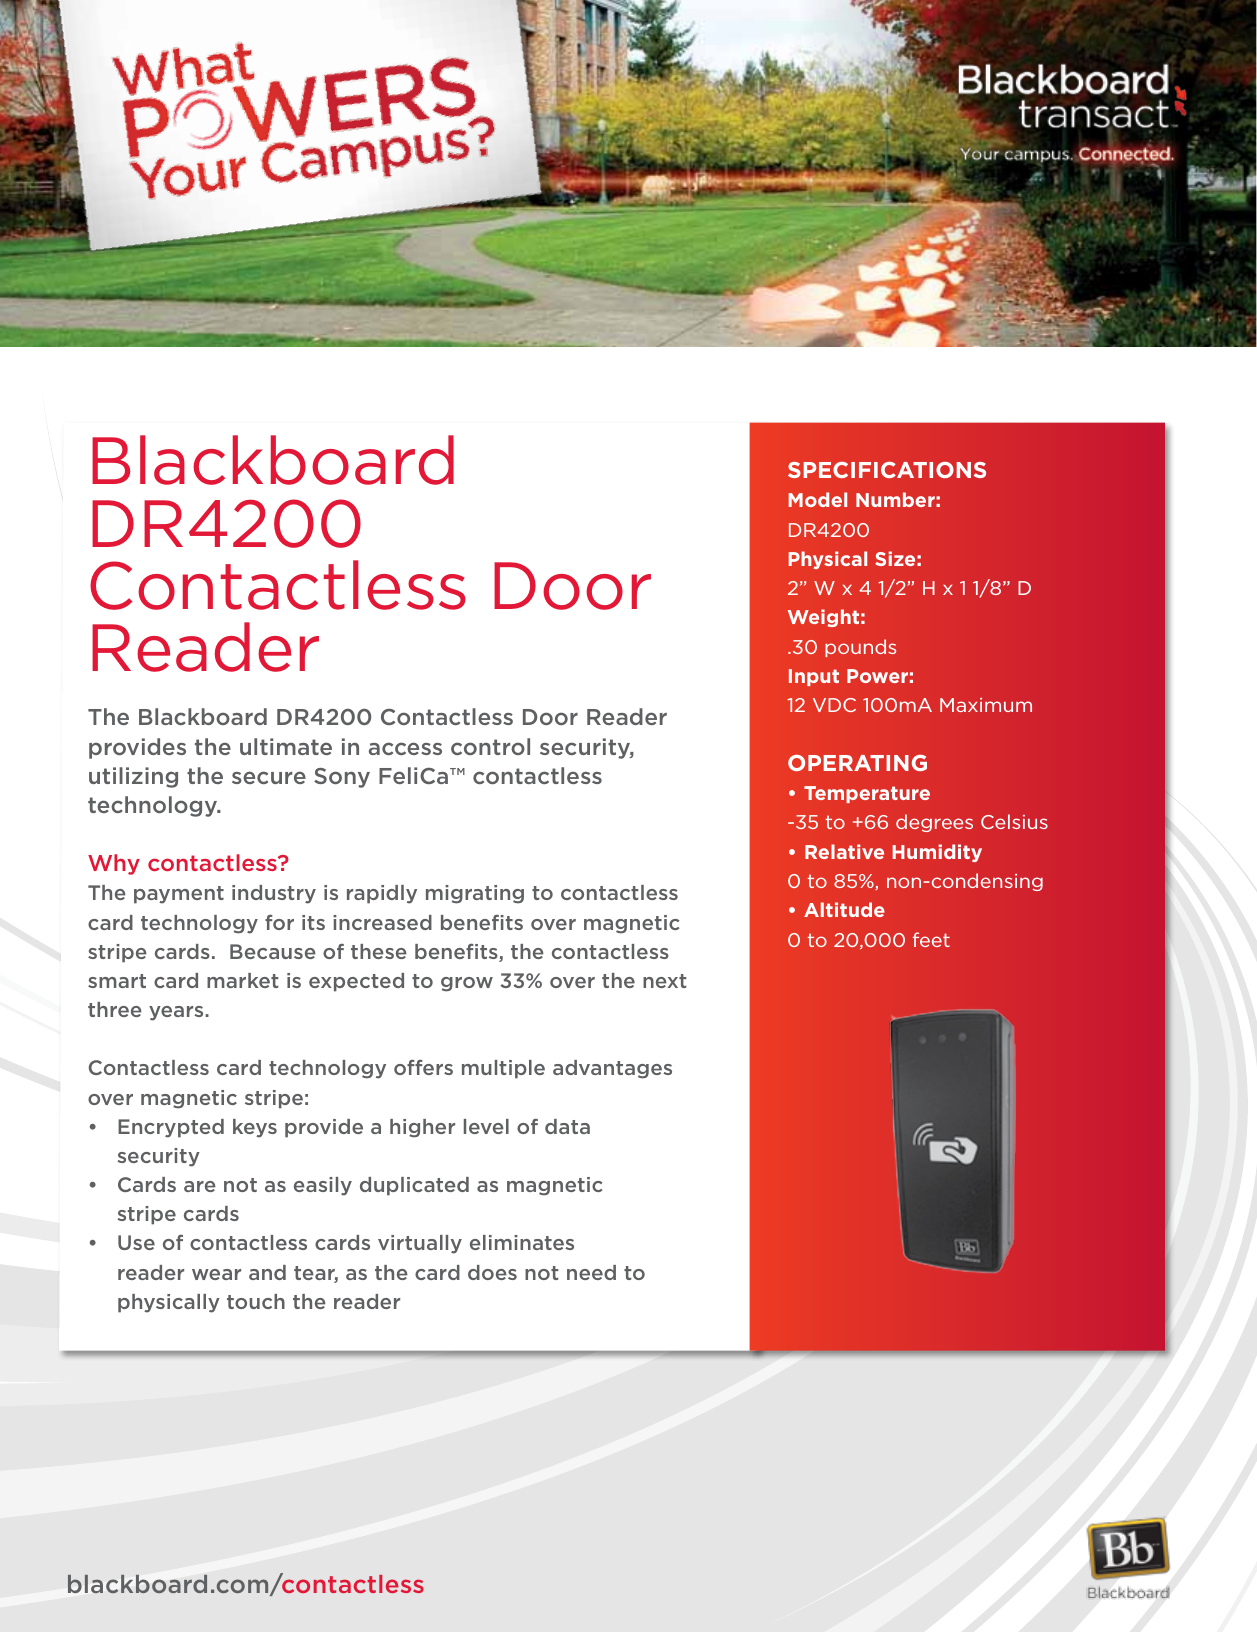 The Blackboard DR4200 Contactless Door Reader provides the ultimate in access control security, utilizing the secure Sony FeliCa™ contactless technology.  Why contactless?The payment industry is rapidly migrating to contactless card technology for its increased beneﬁts over magnetic stripe cards.  Because of these beneﬁts, the contactless smart card market is expected to grow 33% over the next three years.Contactless card technology offers multiple advantages over magnetic stripe:• Encryptedkeysprovideahigherlevelofdata  security• Cardsarenotaseasilyduplicatedasmagnetic   stripe cards• Useofcontactlesscardsvirtuallyeliminates    reader wear and tear, as the card does not need to      physically touch the readerBlackboard DR4200 Contactless Door Reader SPECIFICATIONSModel Number:DR4200Physical Size: 2” W x 4 1/2” H x 1 1/8” DWeight: .30 poundsInput Power:12 VDC 100mA MaximumOPERATING•Temperature-35 to +66 degrees Celsius•RelativeHumidity0 to 85%, non-condensing•Altitude0 to 20,000 feet             blackboard.com/contactless